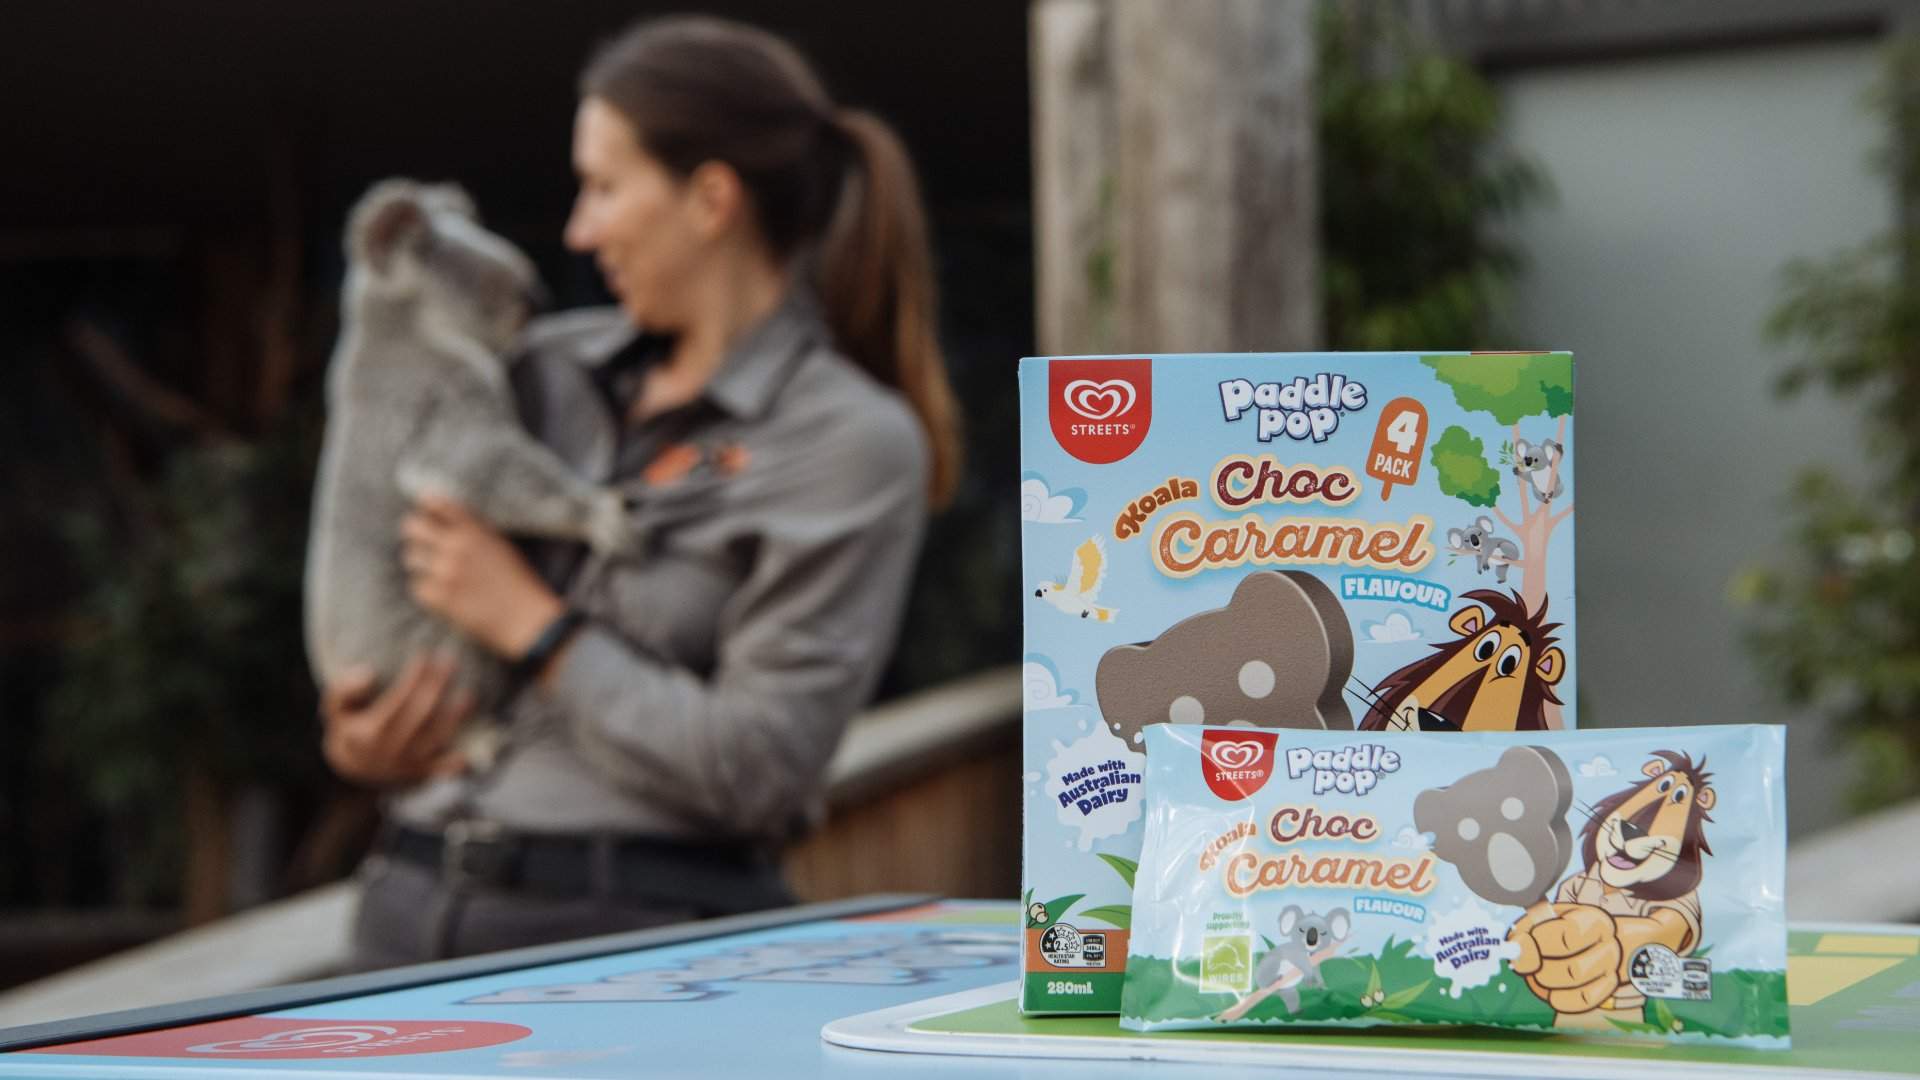 This New Koala-Shaped Paddle Pop Is Helping to Support and Raise Funds for Wildlife Conservation